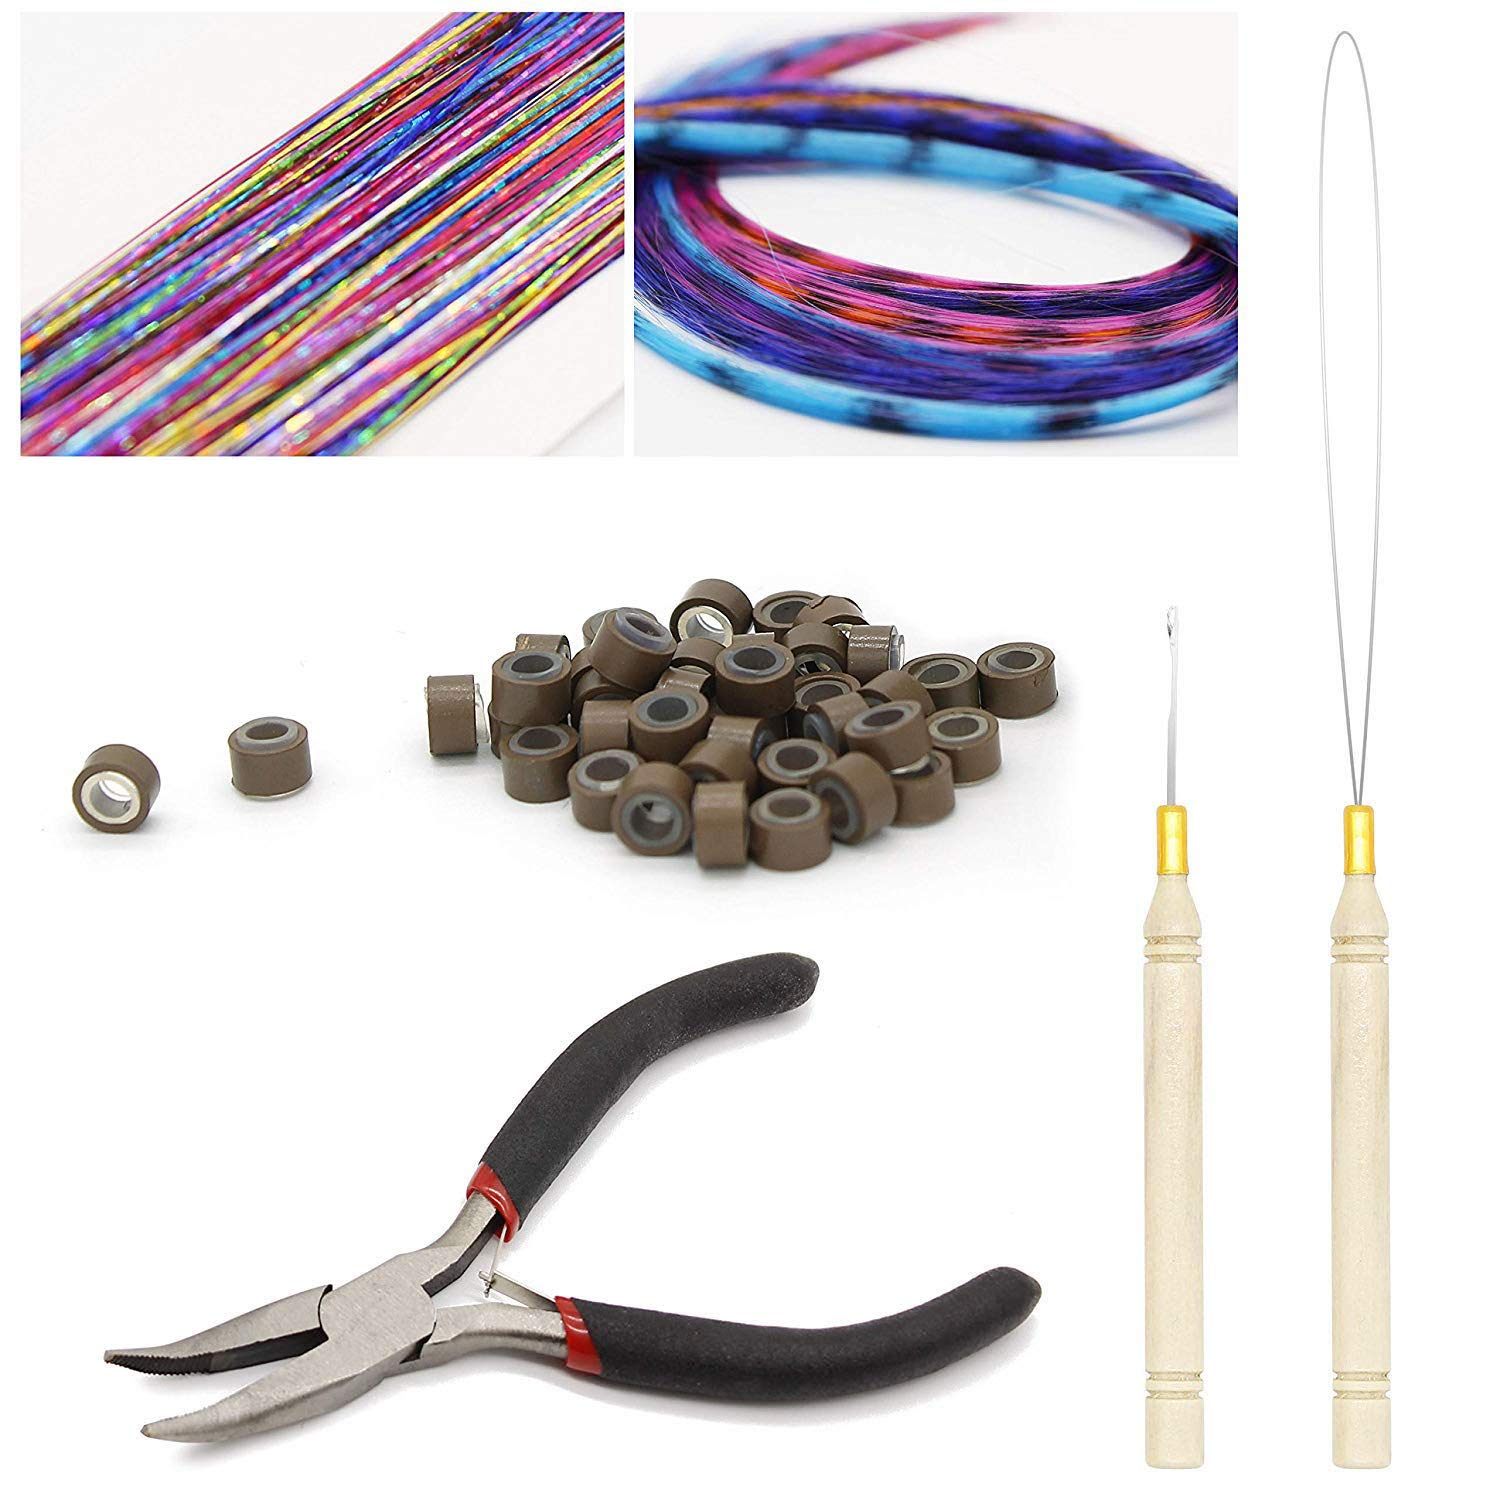 COMPLETE KITS or Pick Only the Tools You Want / Micro Link Beads